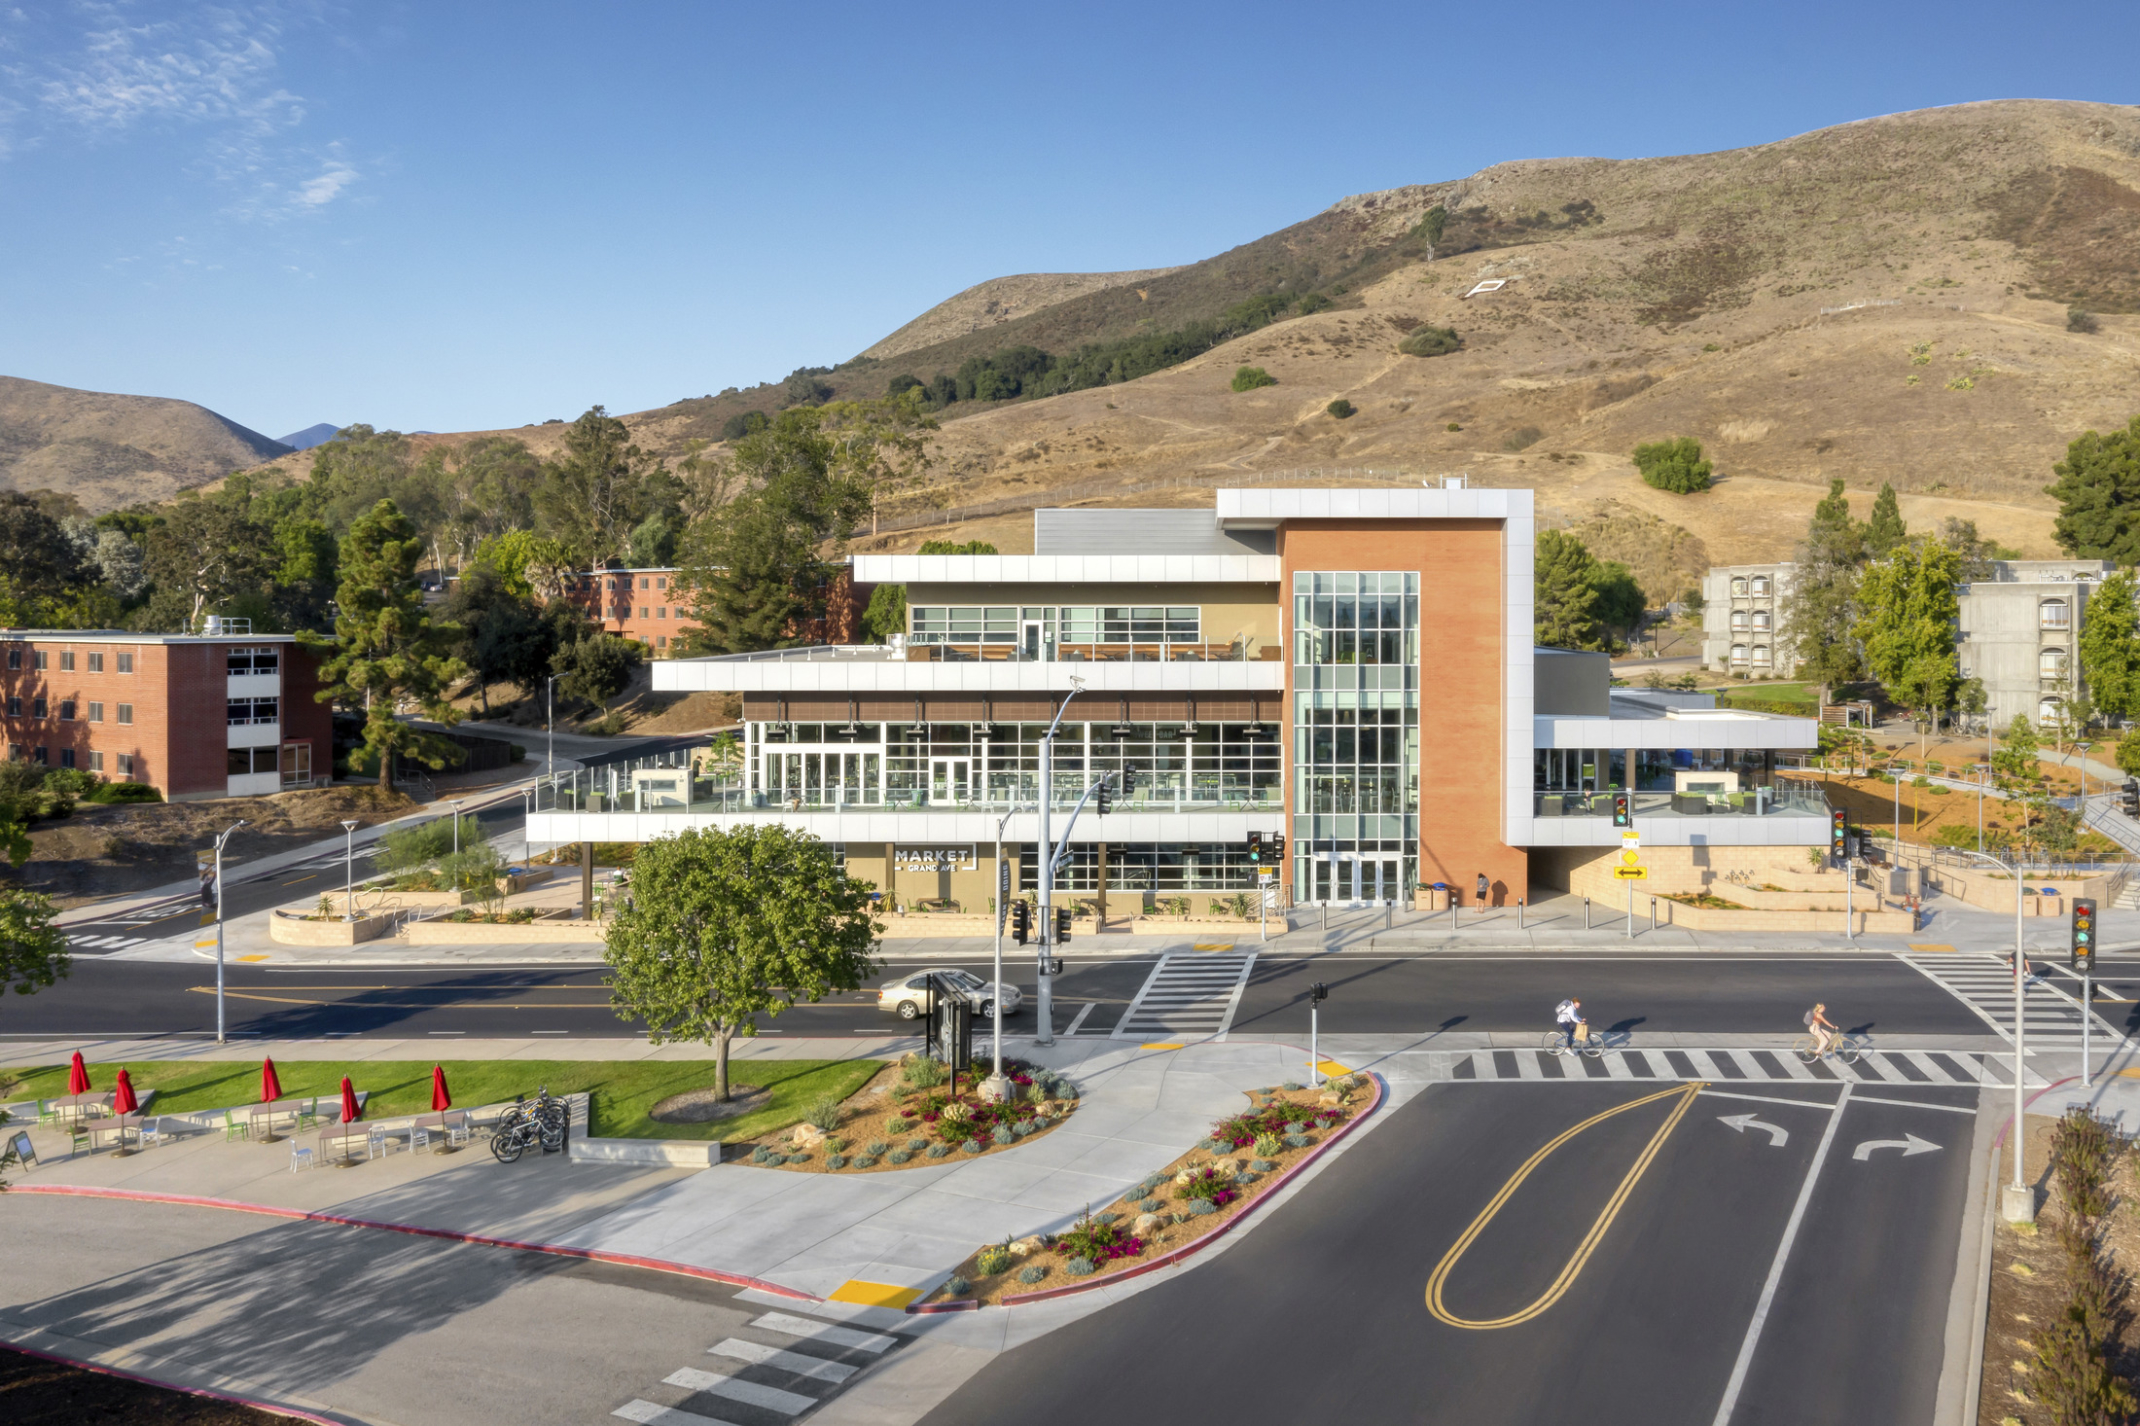 Cal Poly Vista Grande Dining Facility from across an intersection with hill in the background